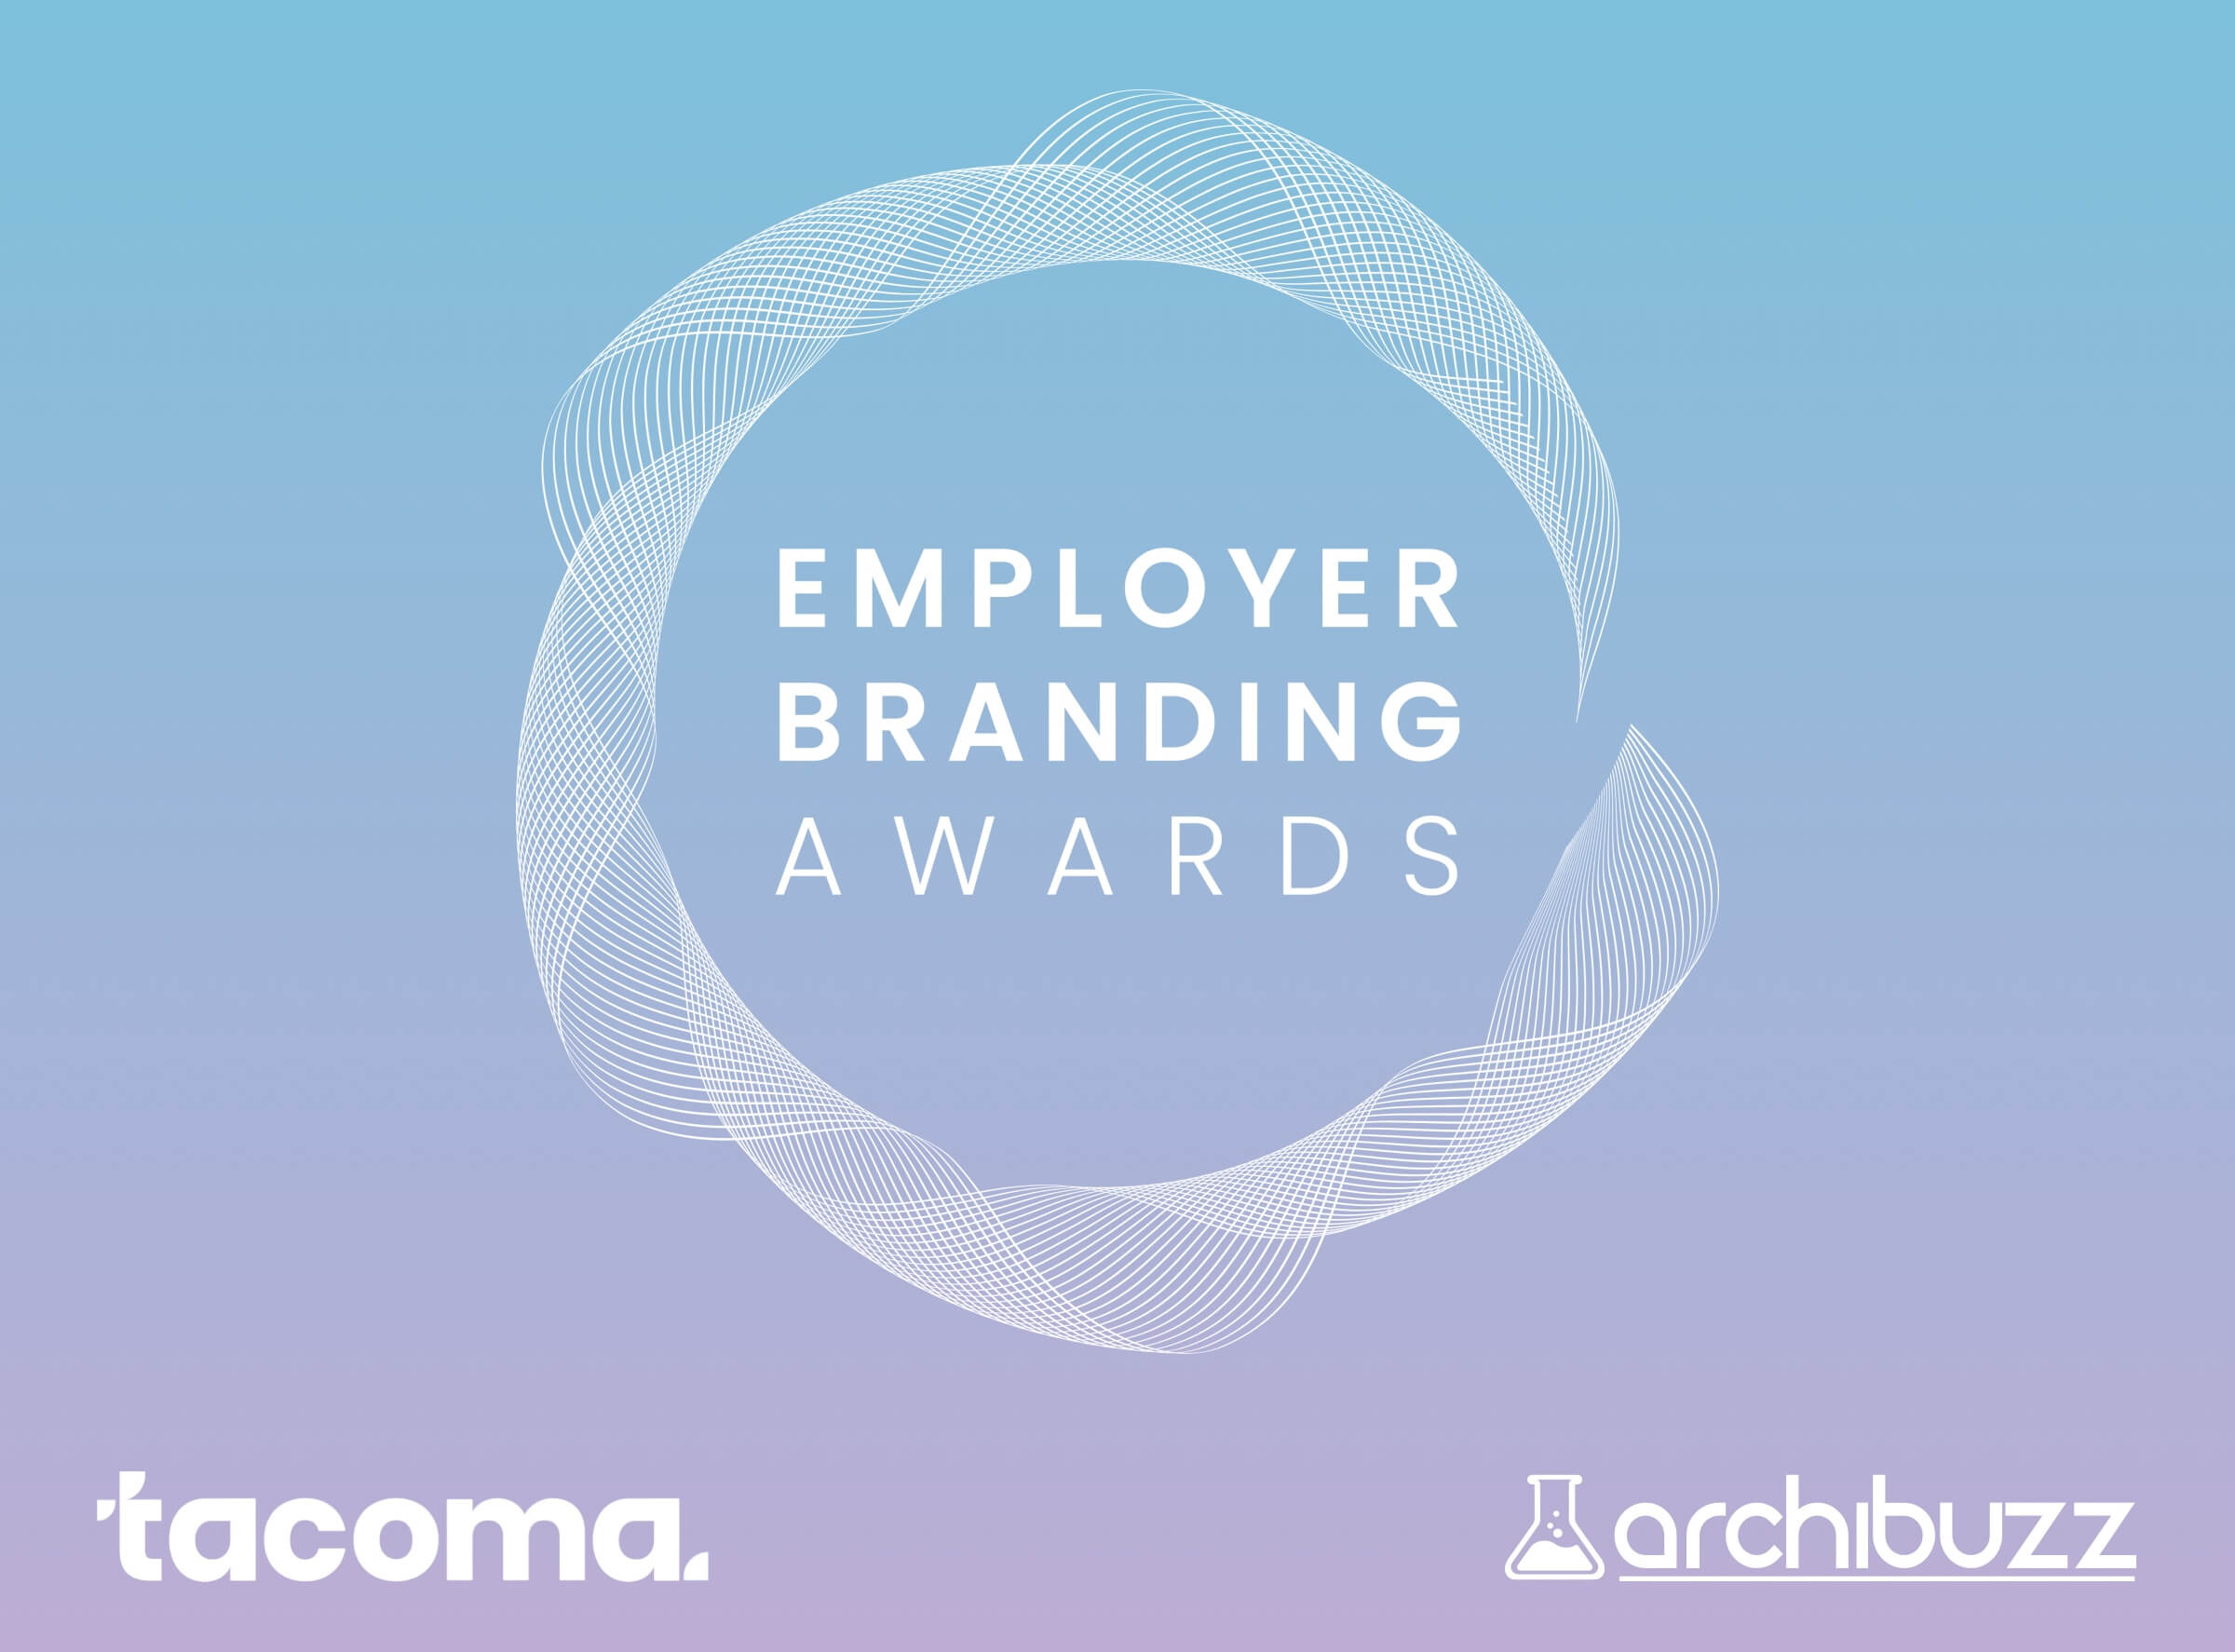 Employer Branding Awards, our Web Agency is the technical partner of the initiative